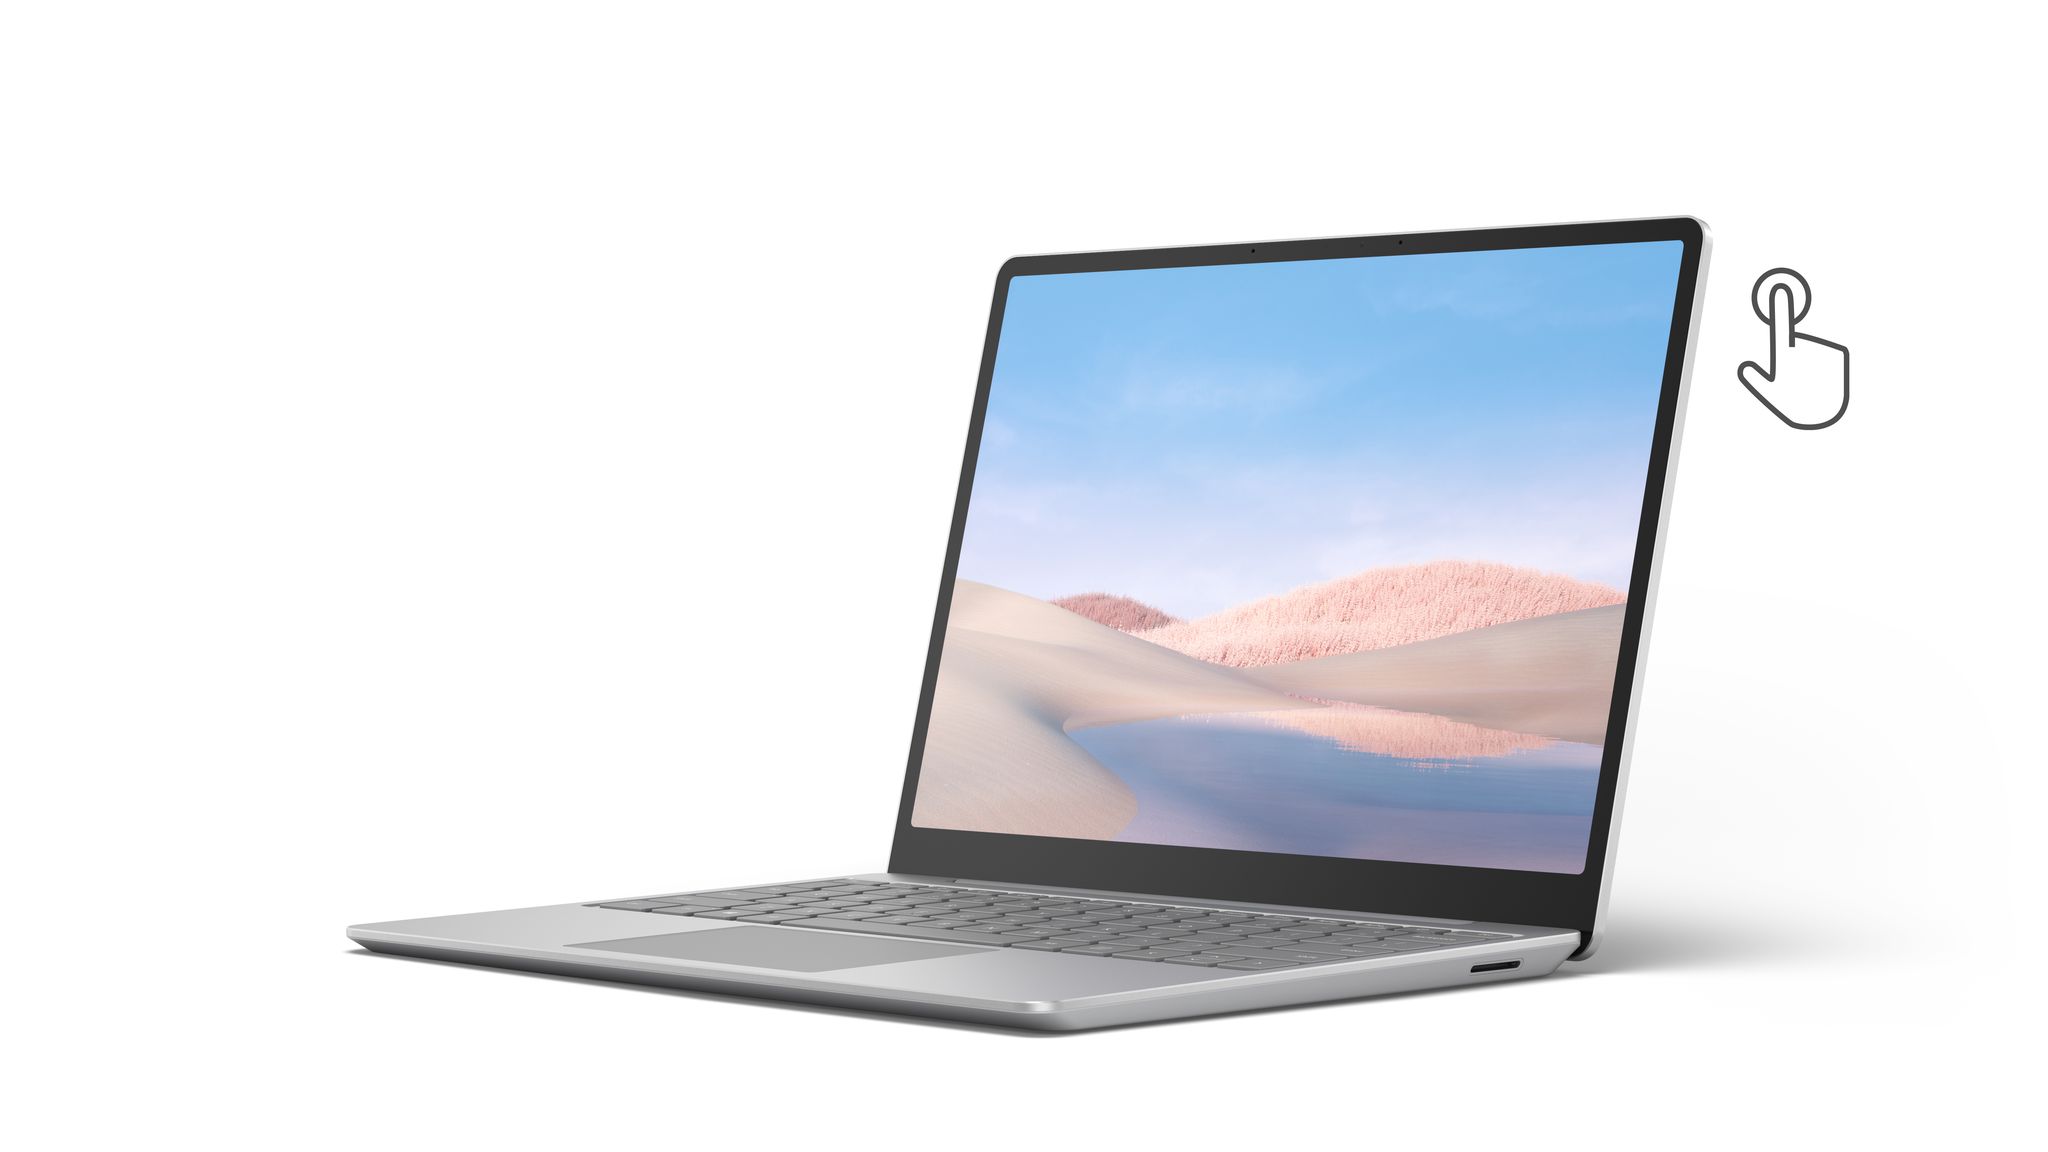 Microsoft Surface Laptop Go, 12.4" Touchscreen, Intel Core i5-1035G1, 8GB Memory, 128GB SSD, Platinum, THH-00001 - image 1 of 7